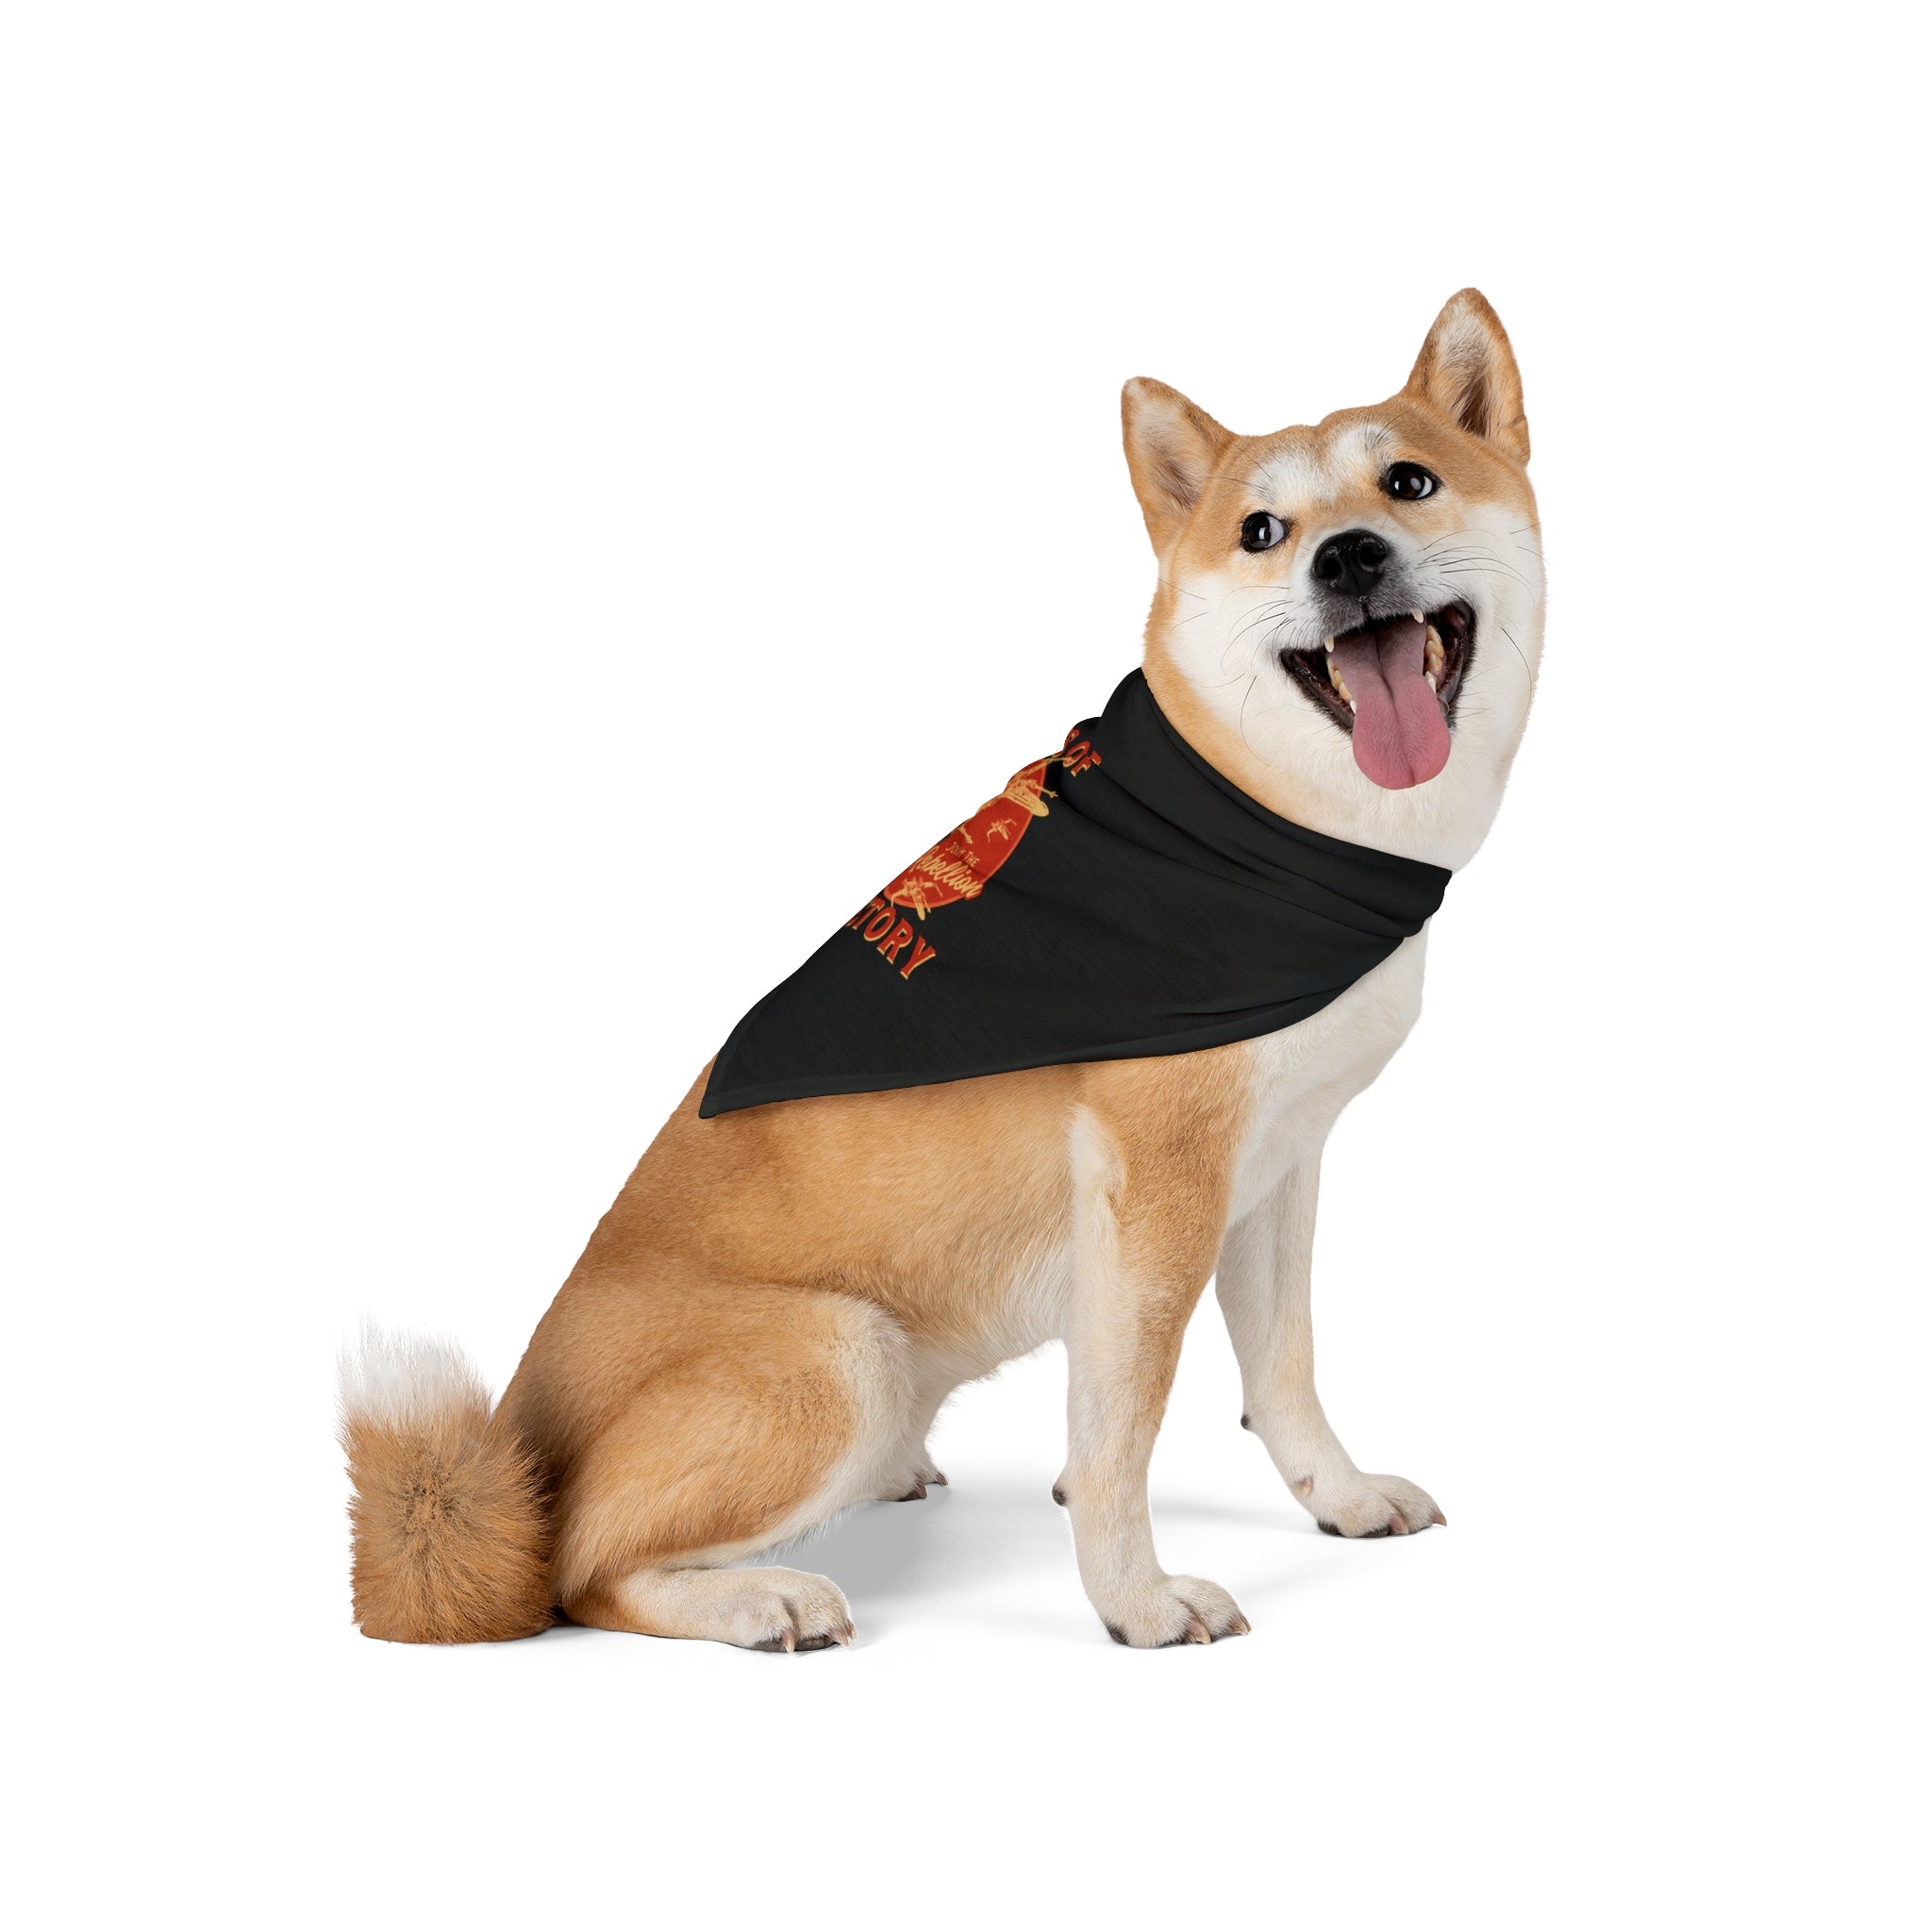 A Shiba Inu dog is sitting, wearing a black Wings of Victory - Pet Bandana with red and gold patterns. Facing the camera with its tongue out, the soft-spun polyester fabric ensures maximum pet comfort.